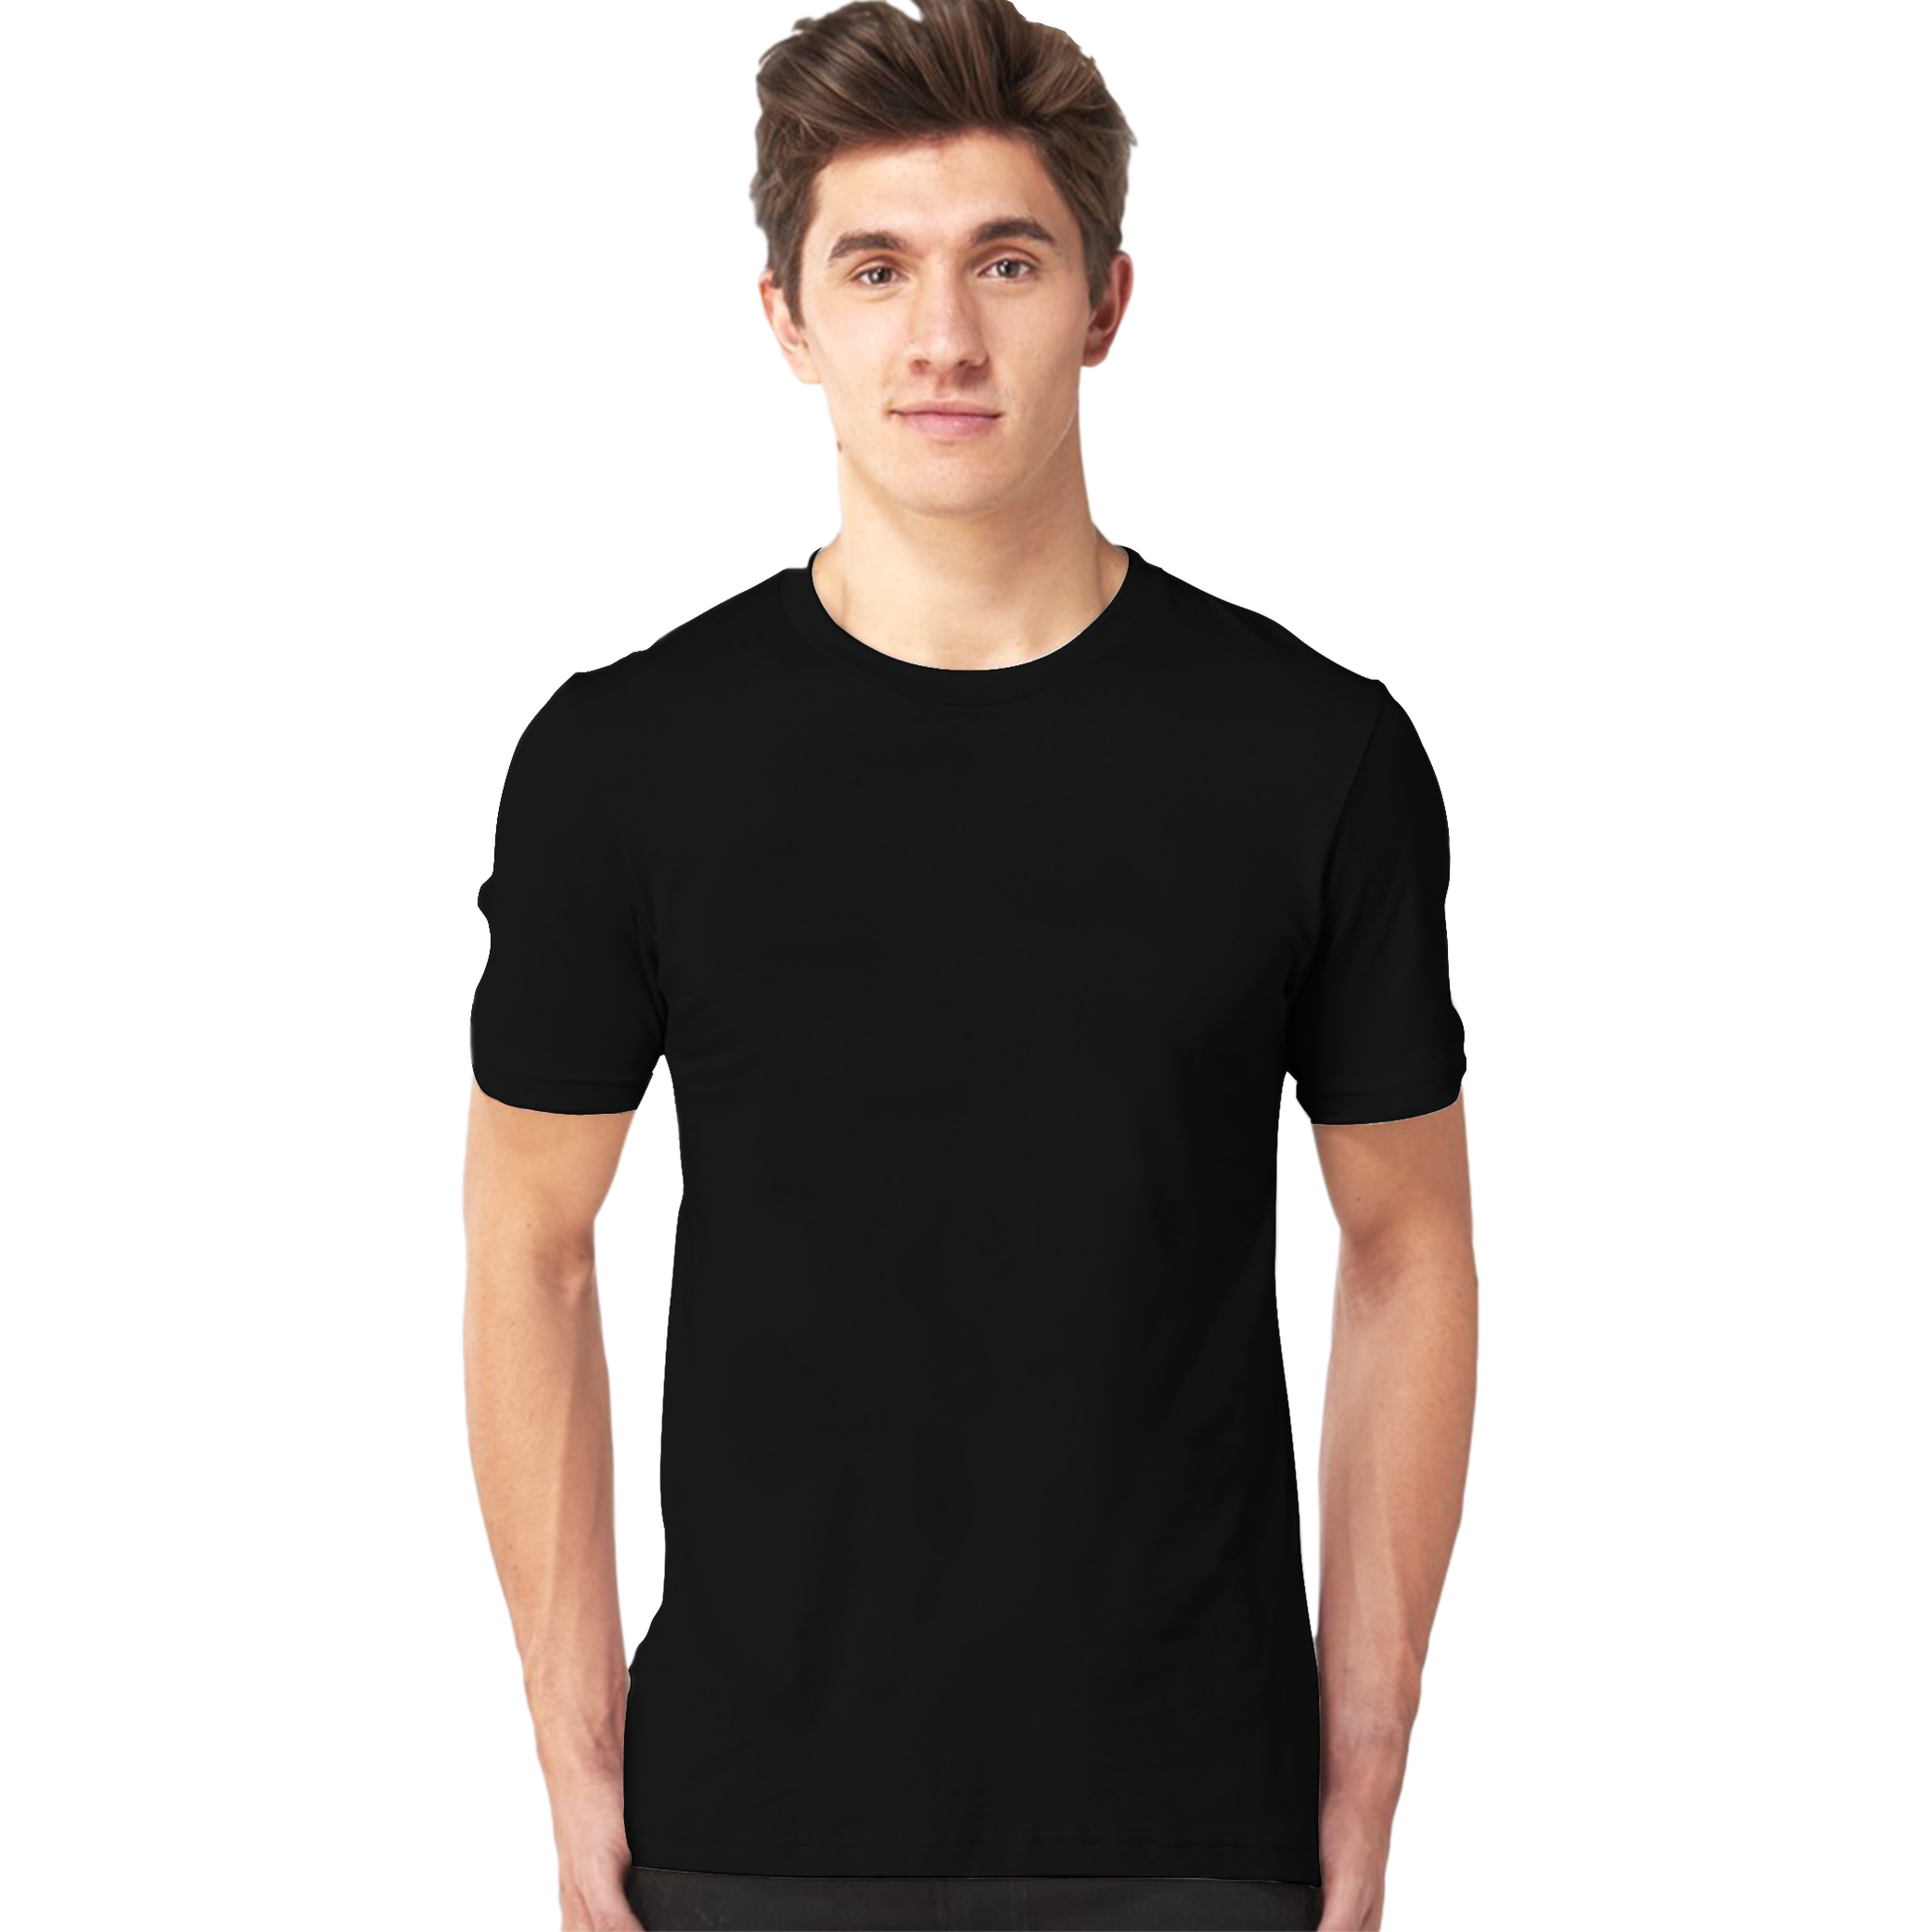 Download PNG image - The Scoop-Neck T-Shirt PNG Photo 